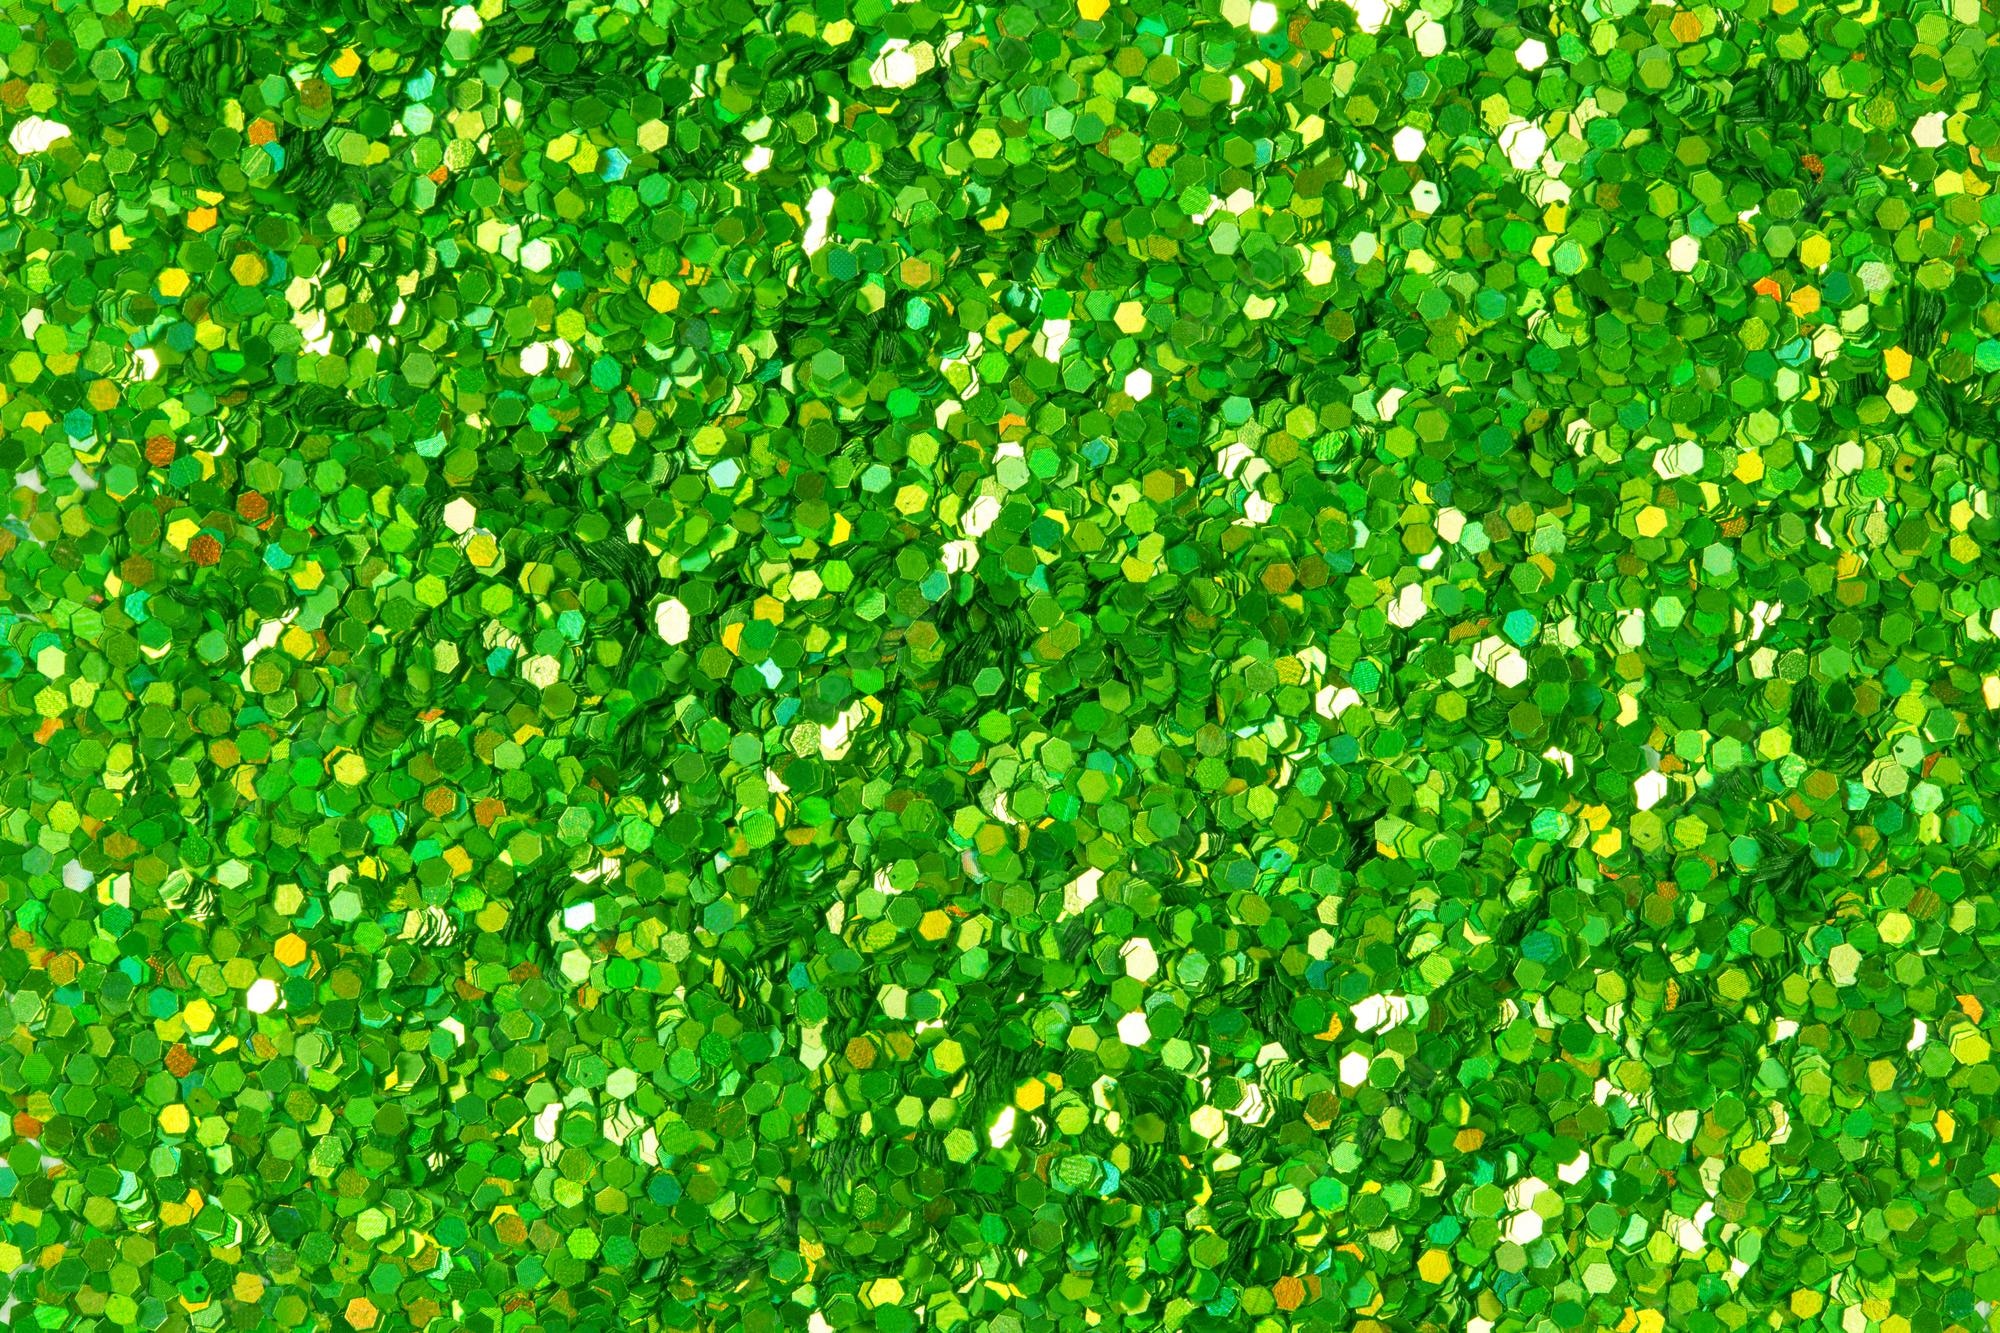 Lime green glitter Image. Free Vectors, & PSD